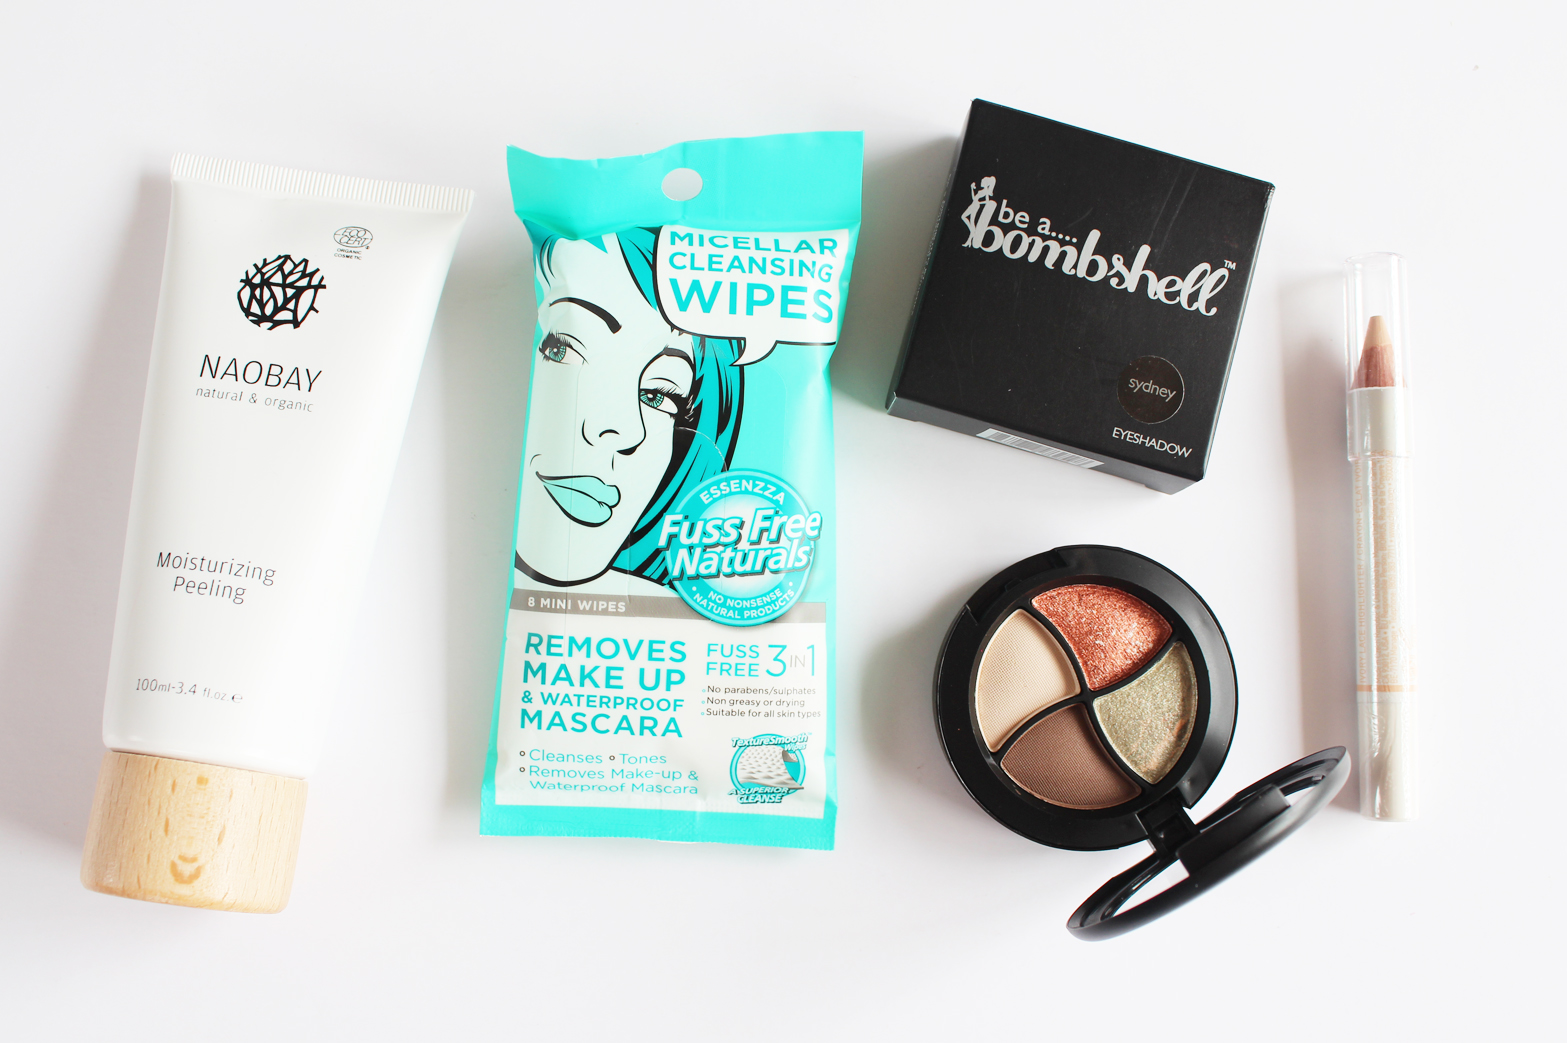 LUST HAVE IT | Women's Beauty Box December '15 - Unboxing + Initial Thoughts - CassandraMyee